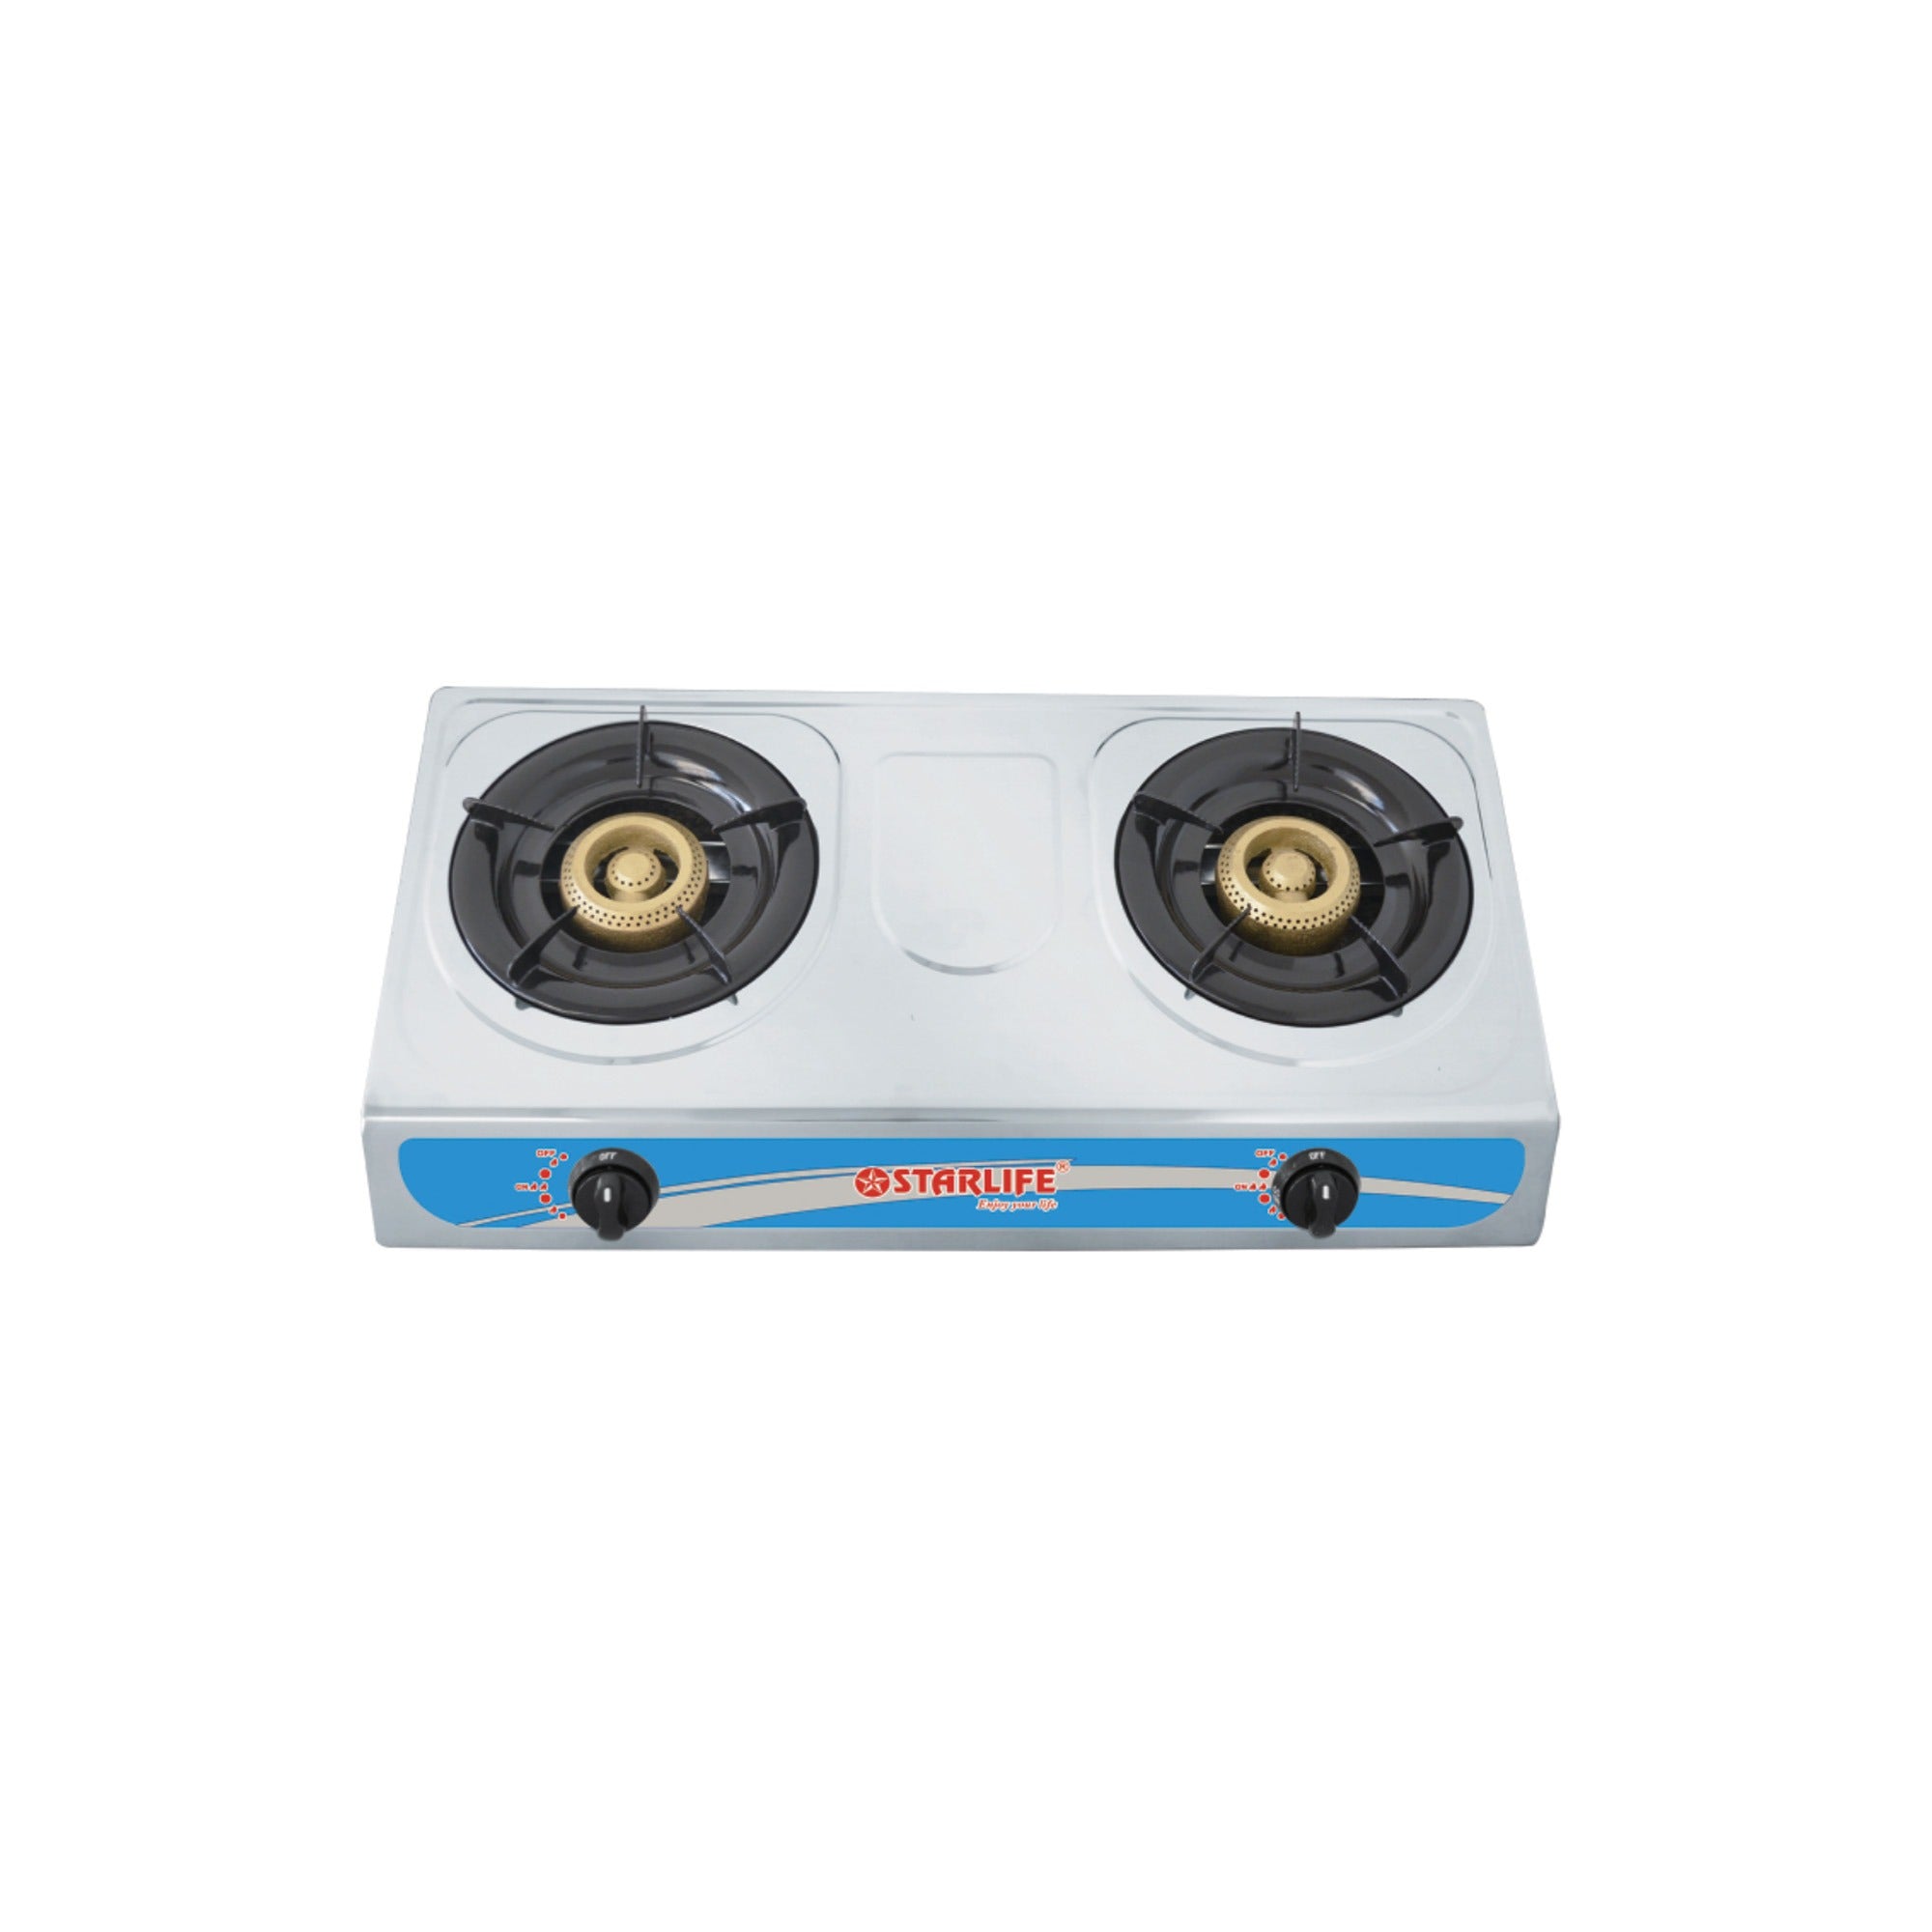 Starlife Gas Stove